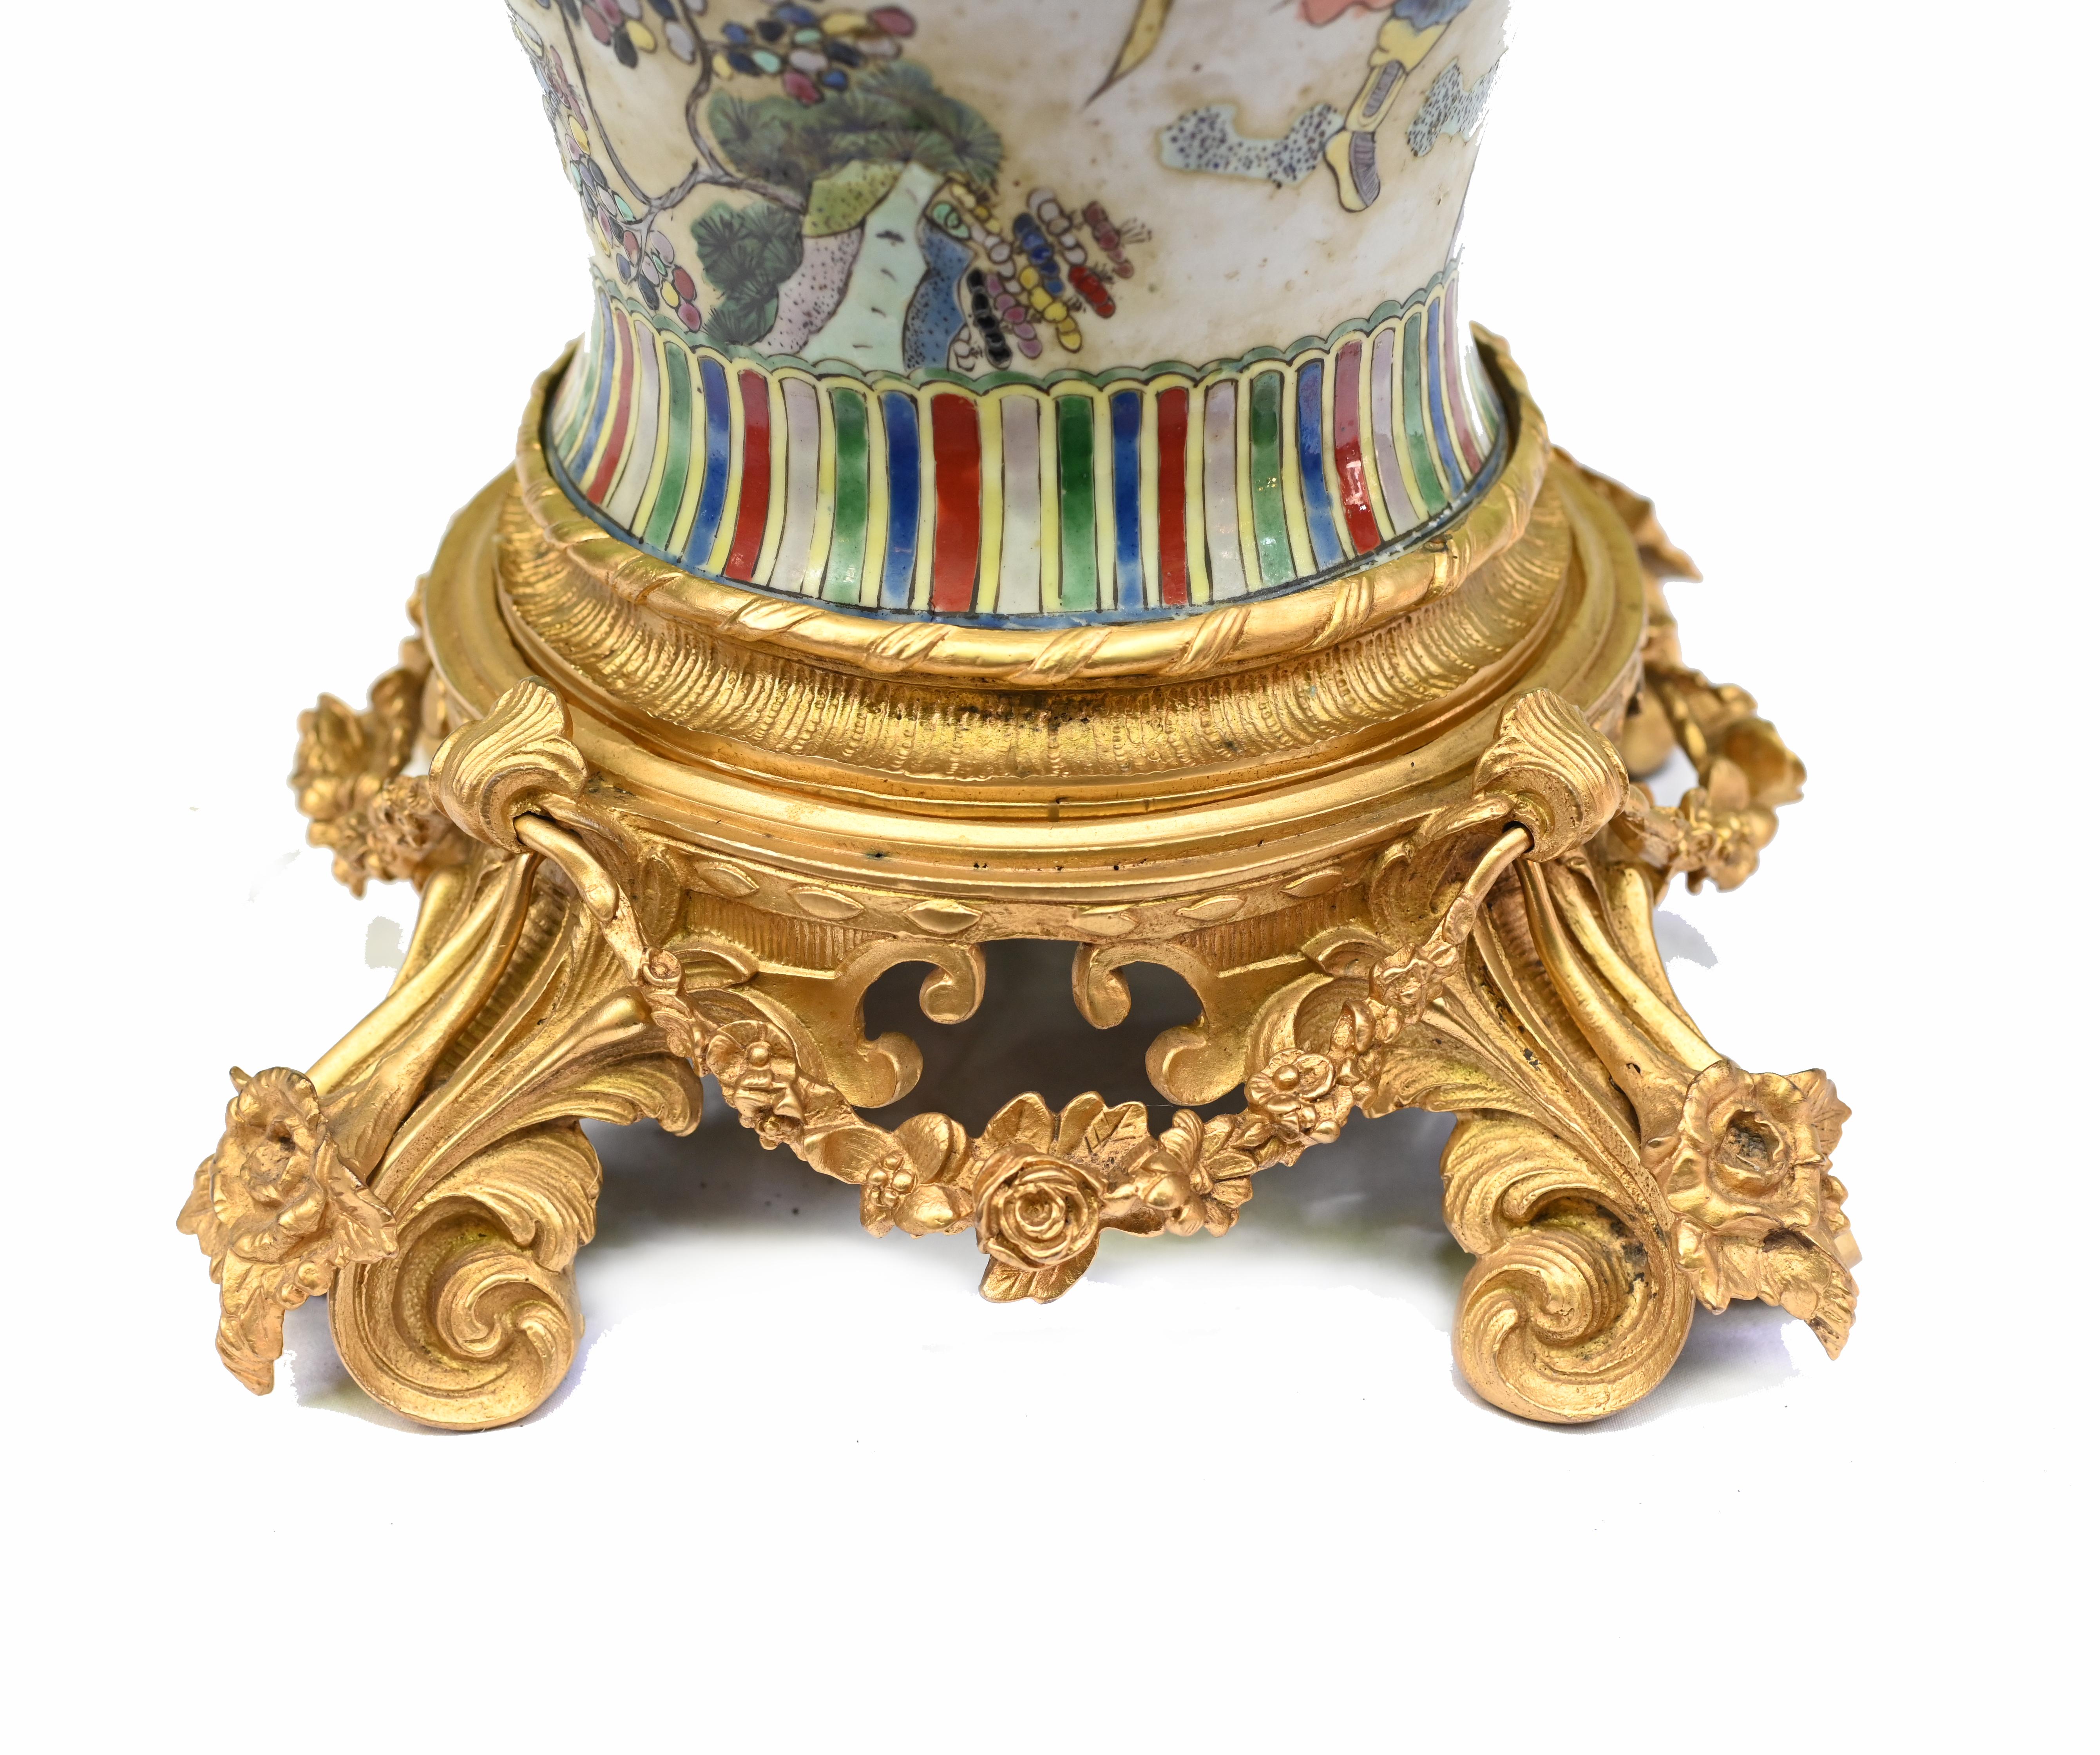 Elegant single Chinese Qianlong porcelain vases with French ormolu mounts
It was common for these vases to be adapted for the French and English markets with the ormolu mounts
The ormolu is very well cast and features a grape and leaf rim and a